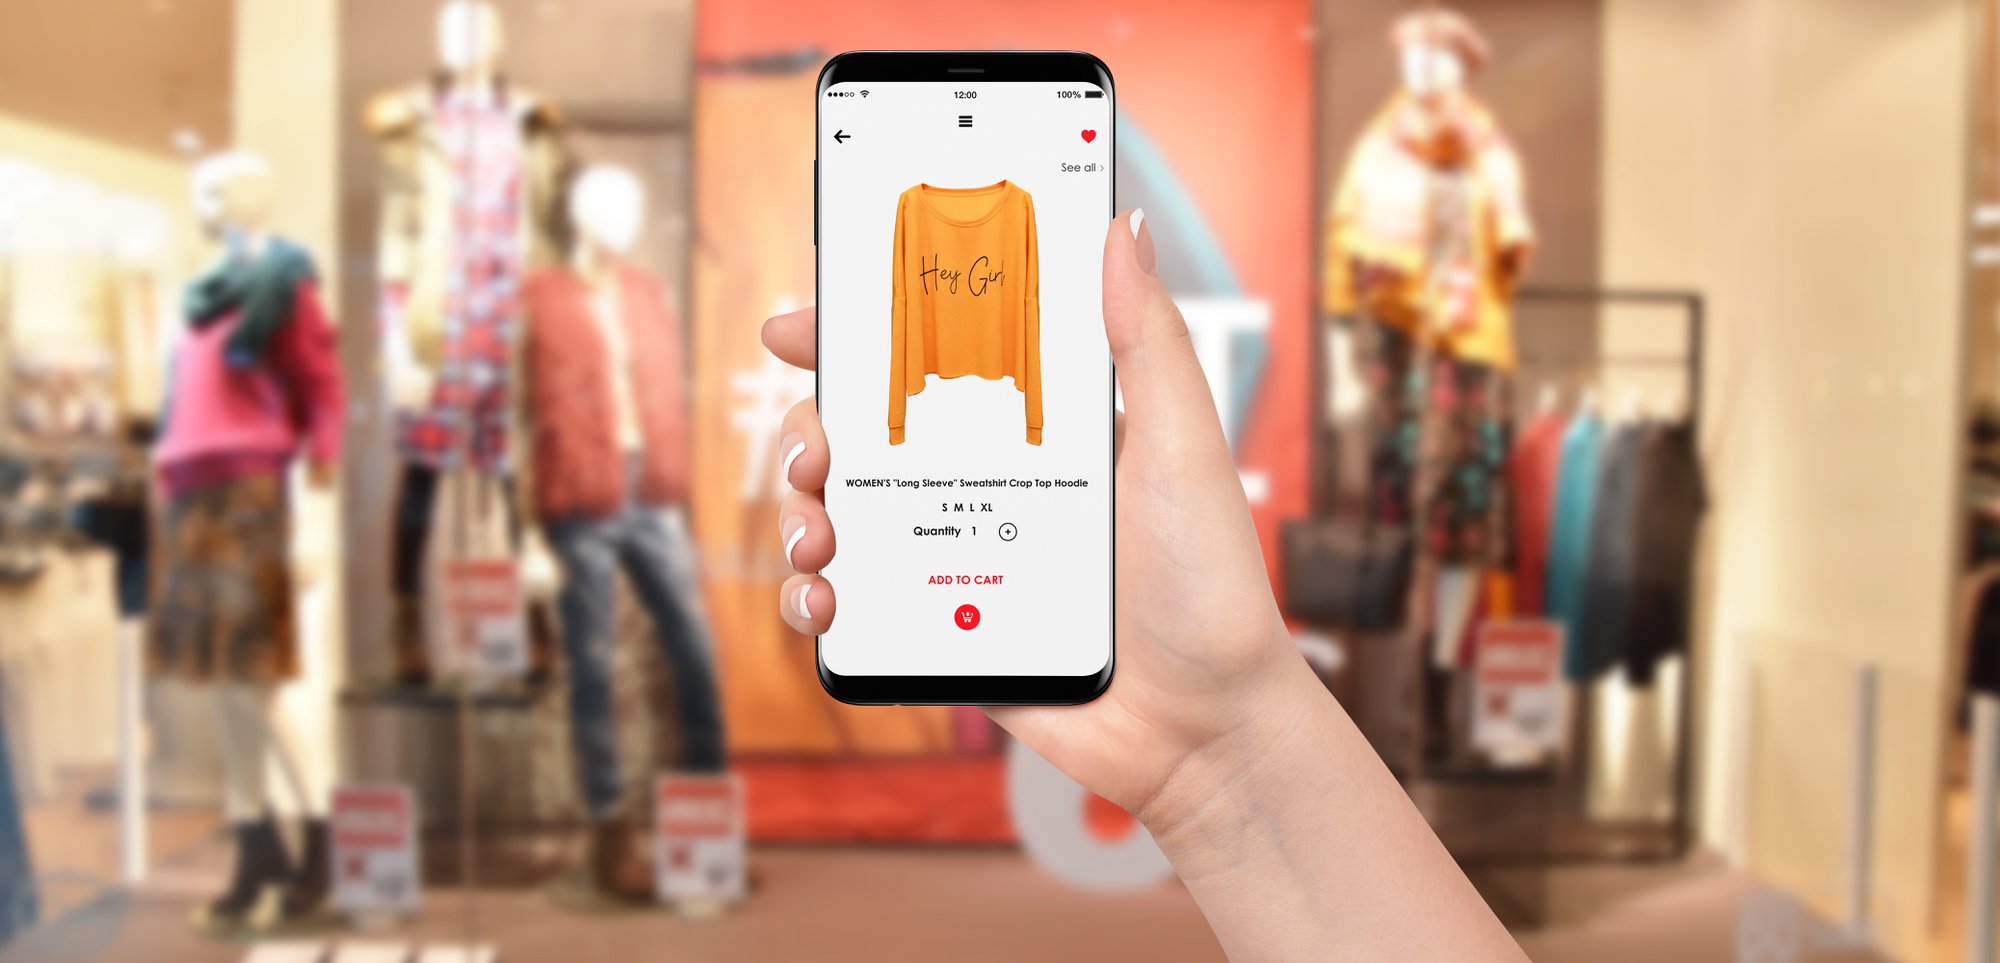 Supporting Sales – 3 Tips For An Eye-Catching E-Commerce Mobile App